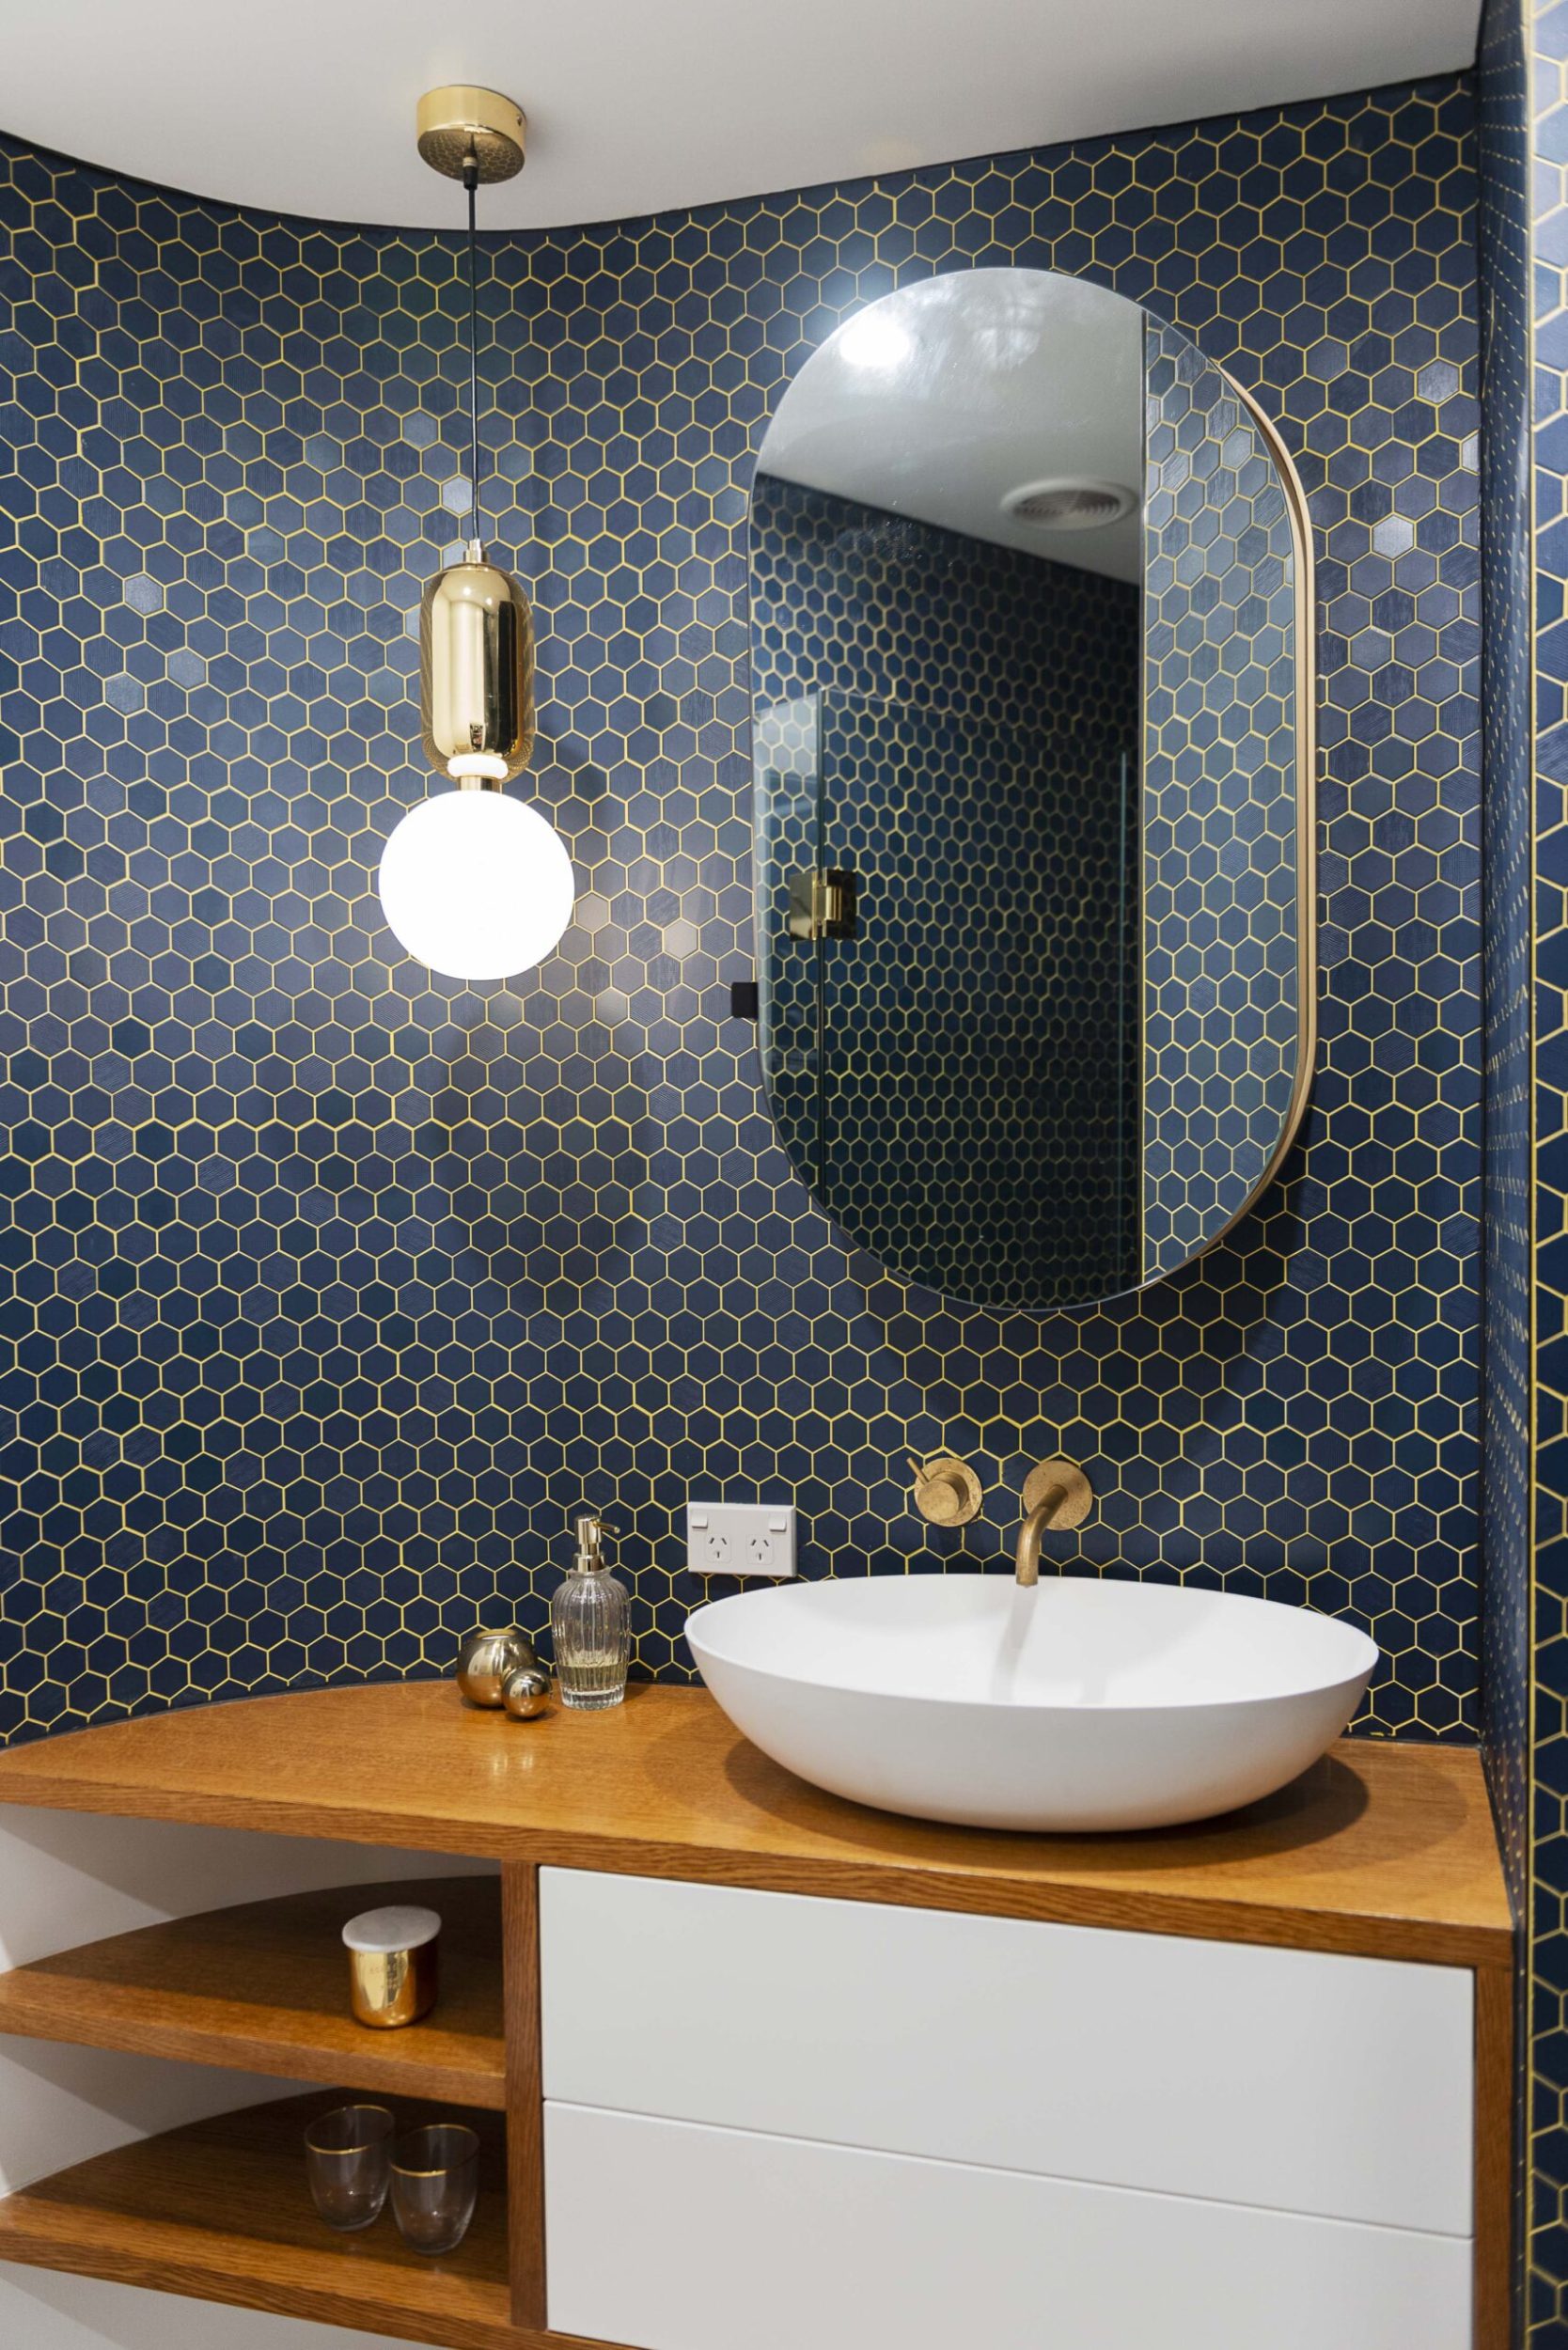 Ensuite with blue honeycomb tile and gold pendant light